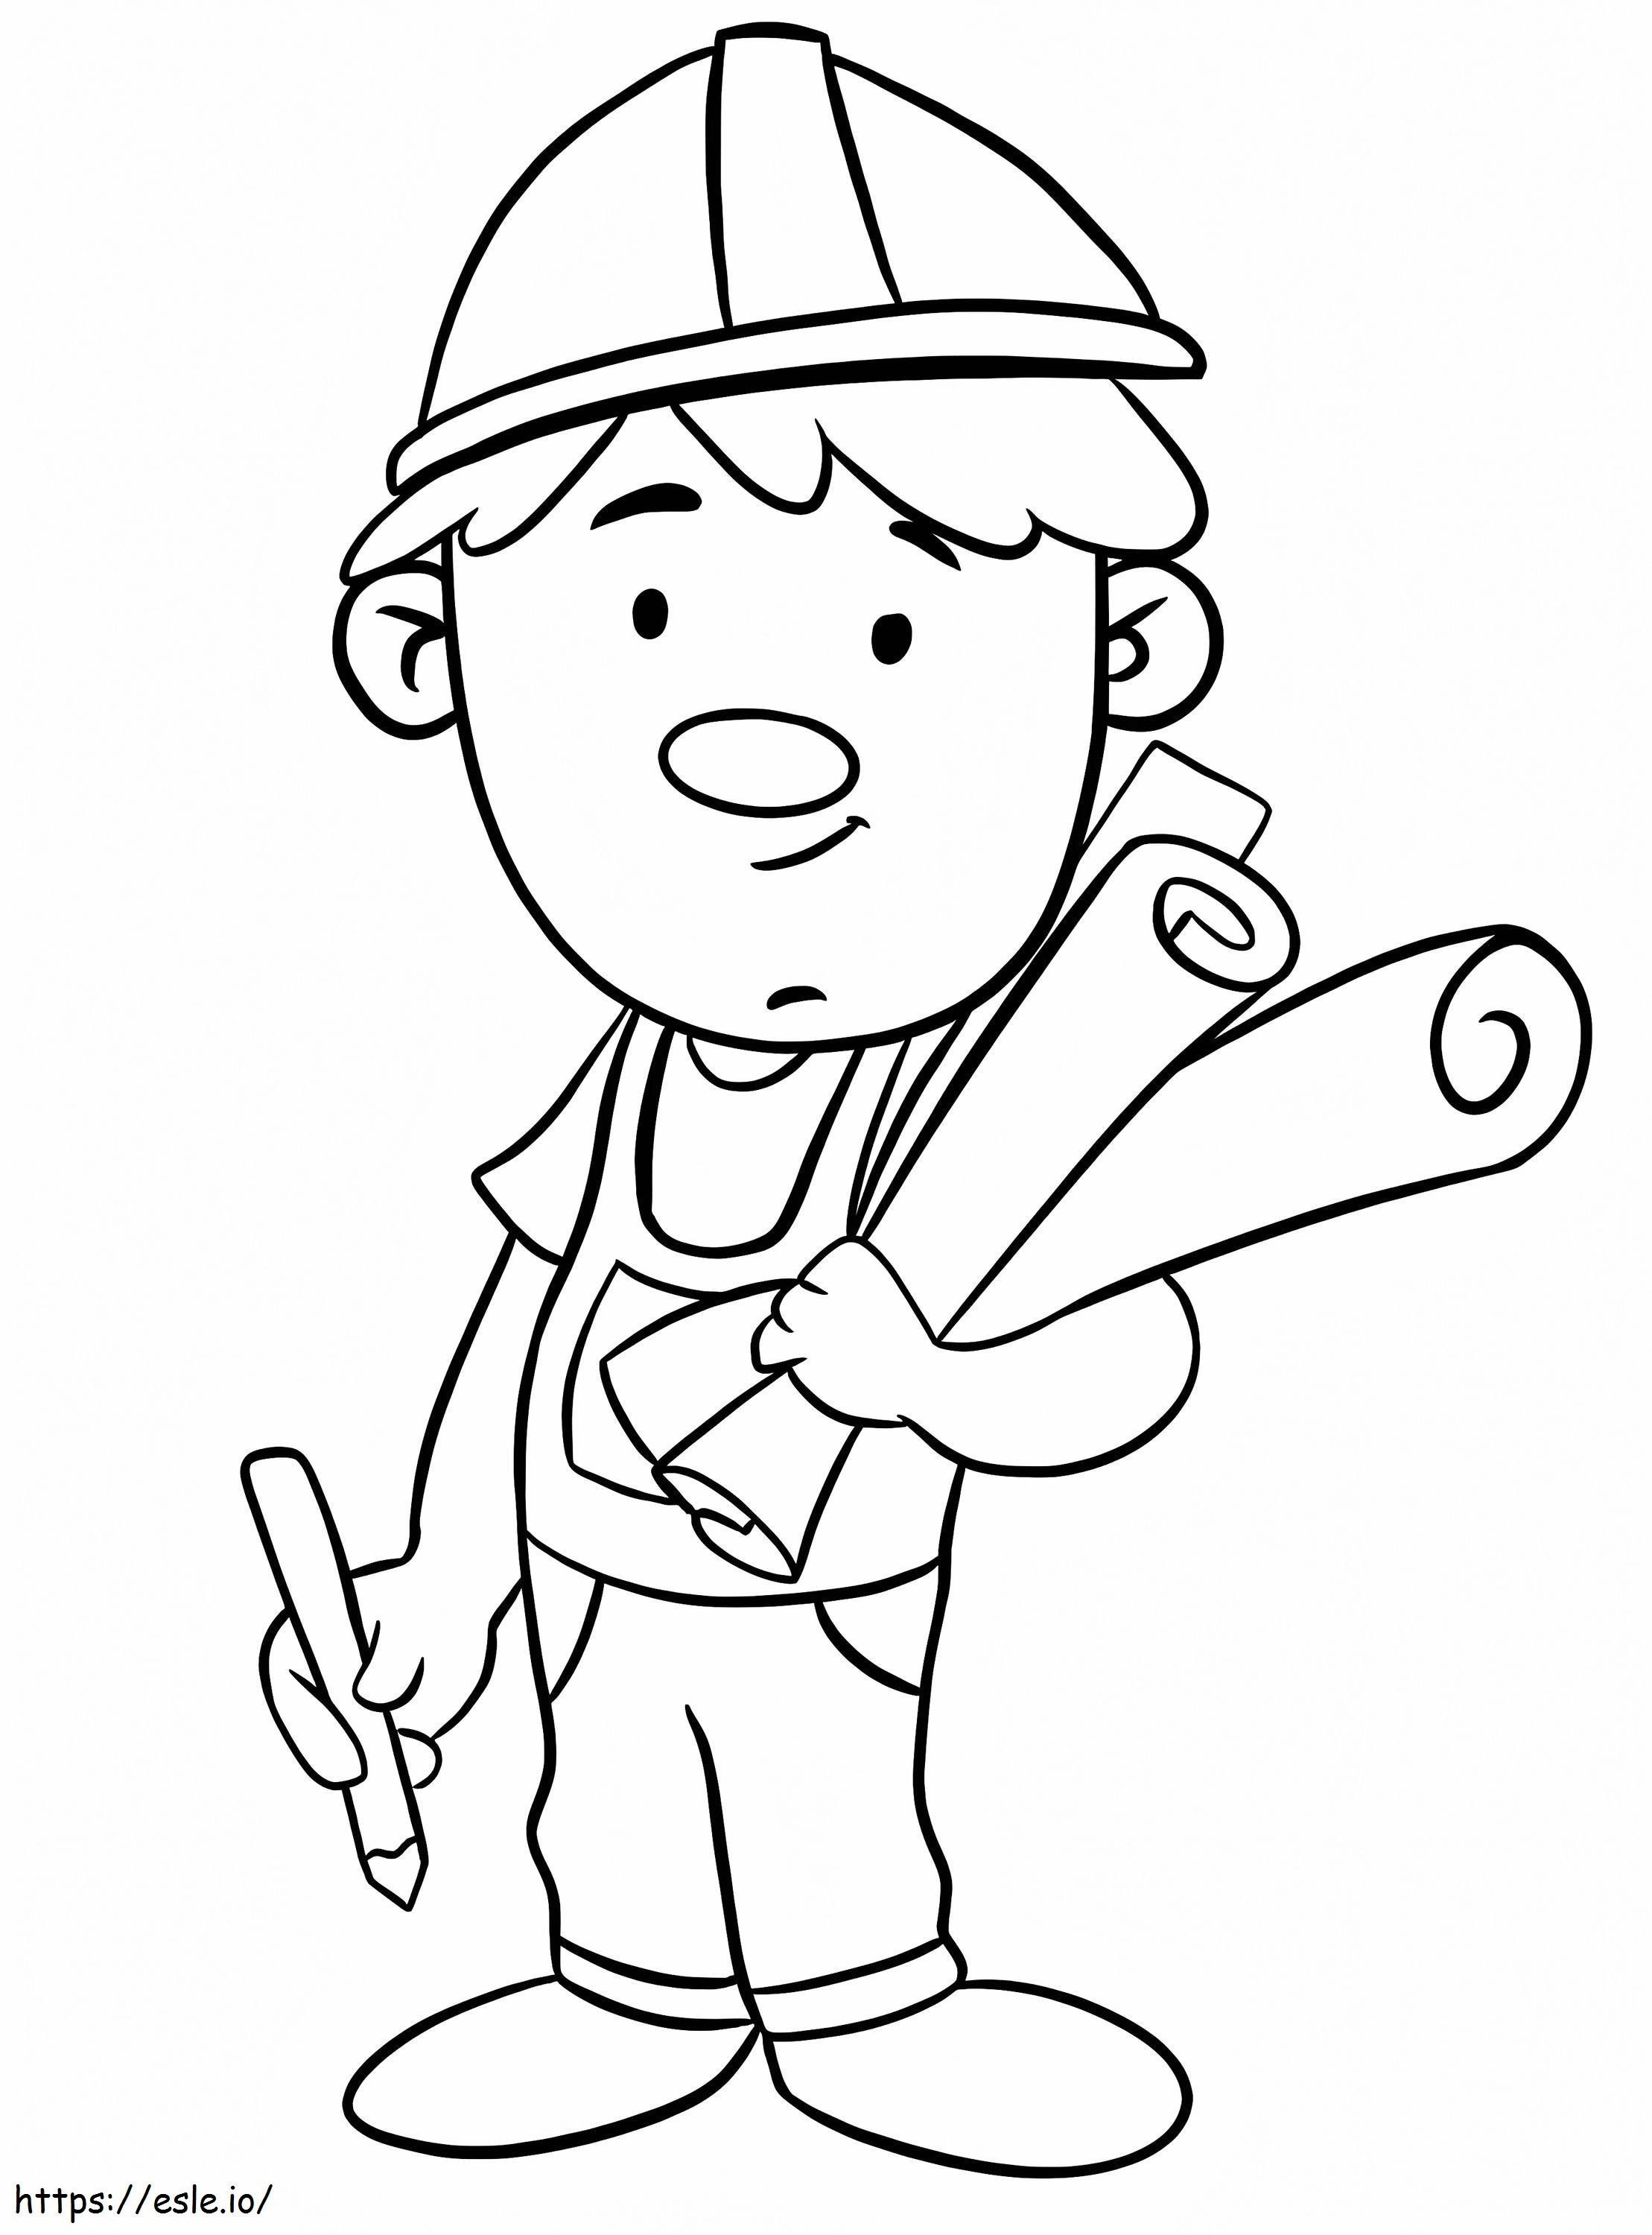 Engineer 1 coloring page